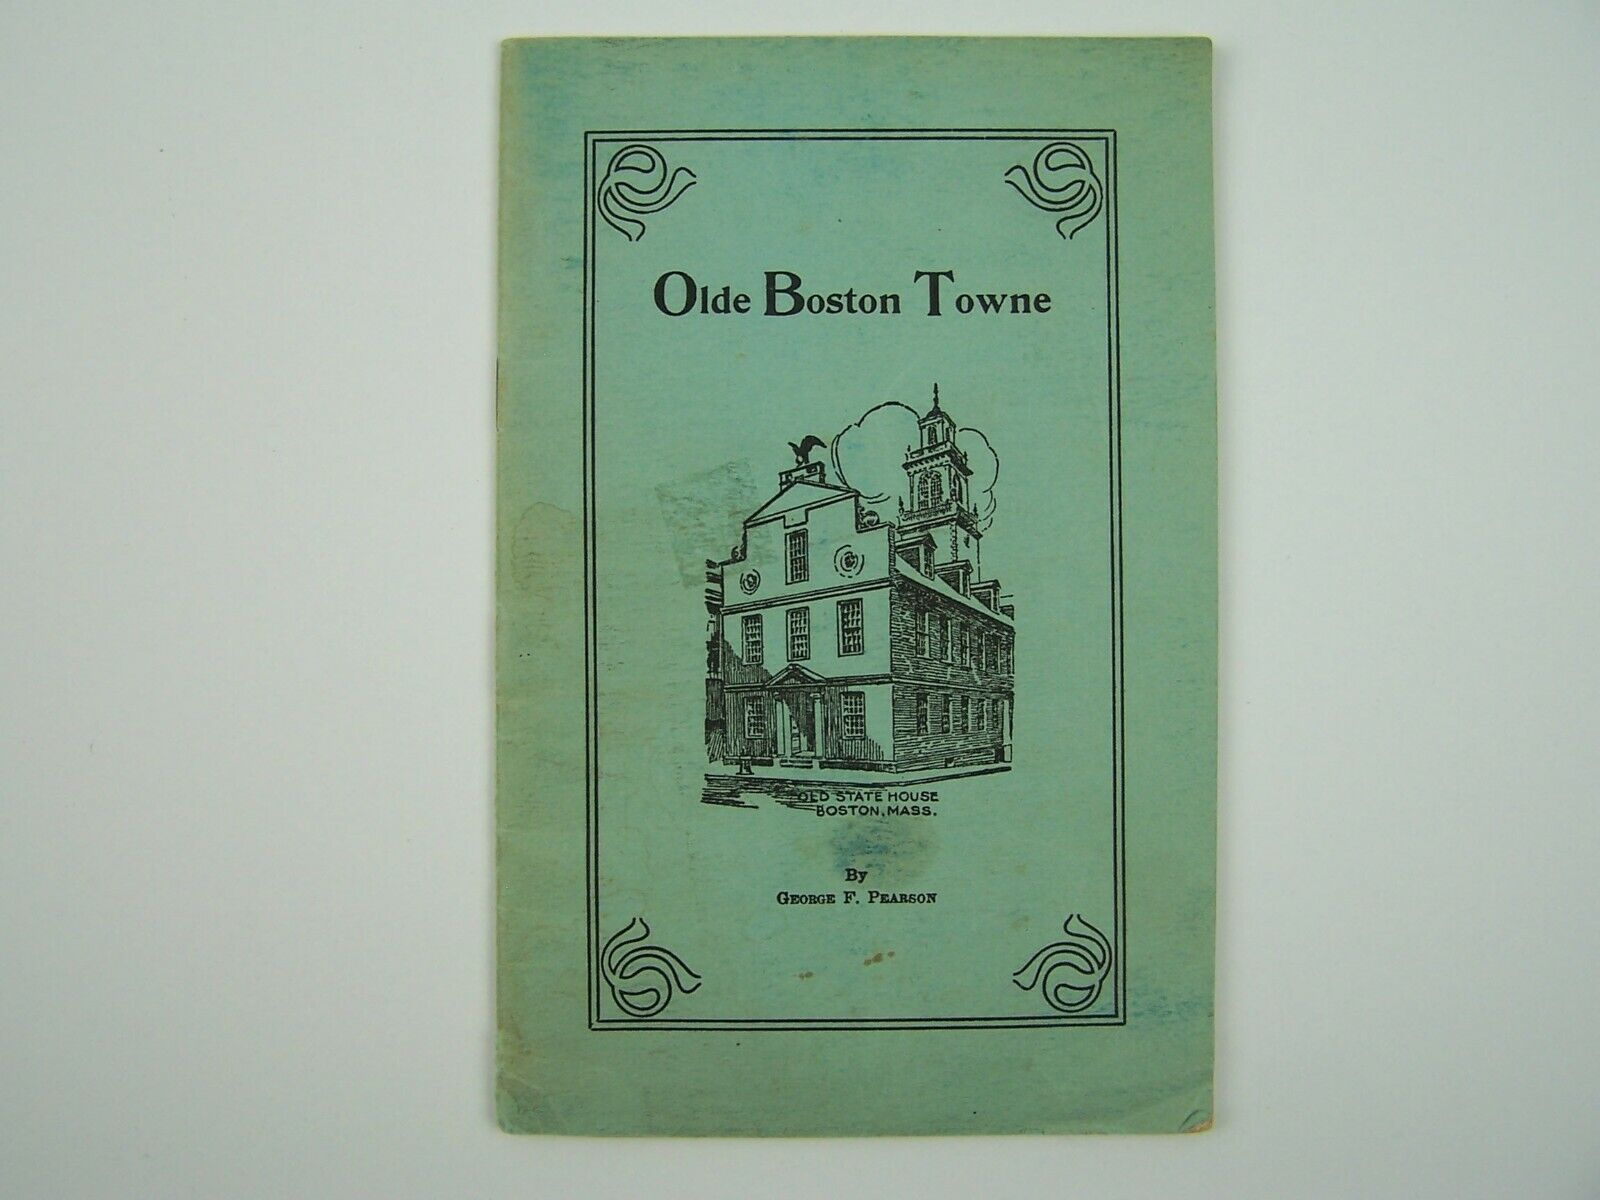 Olde Boston Towne Paperback 1947 by George F Pearson Illustrated